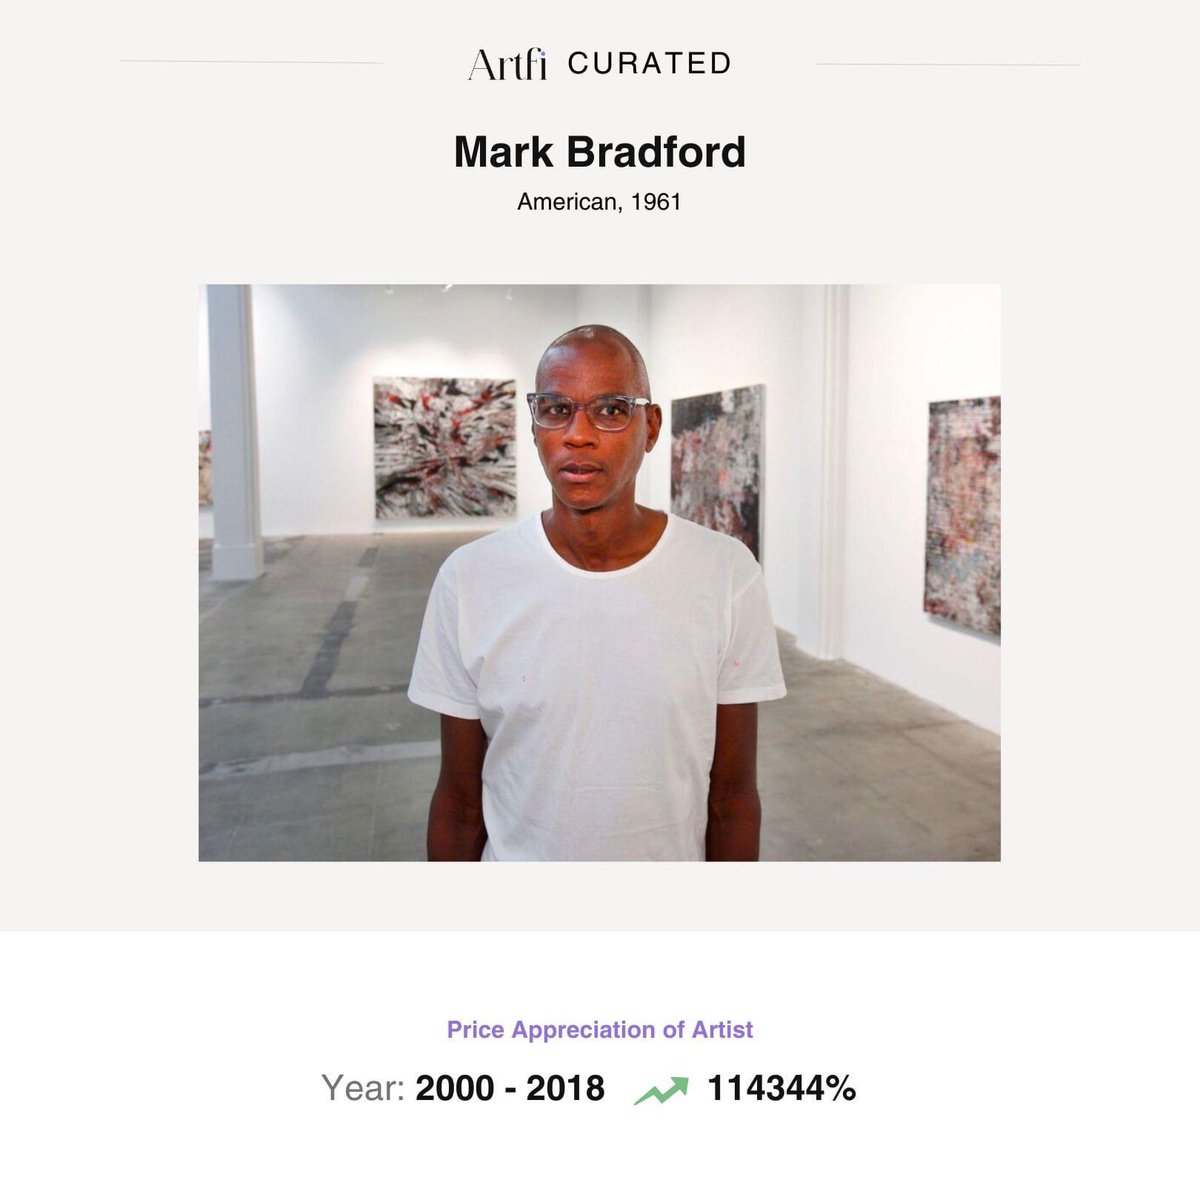 Mark Bradford is an American artist best known for his large-scale abstract mixed-media works exploring race, identity, and social justice themes. His works are characterised by their bold use of colour, intricate layering, and powerful visual impact.

In 2000, Bradford's highest…